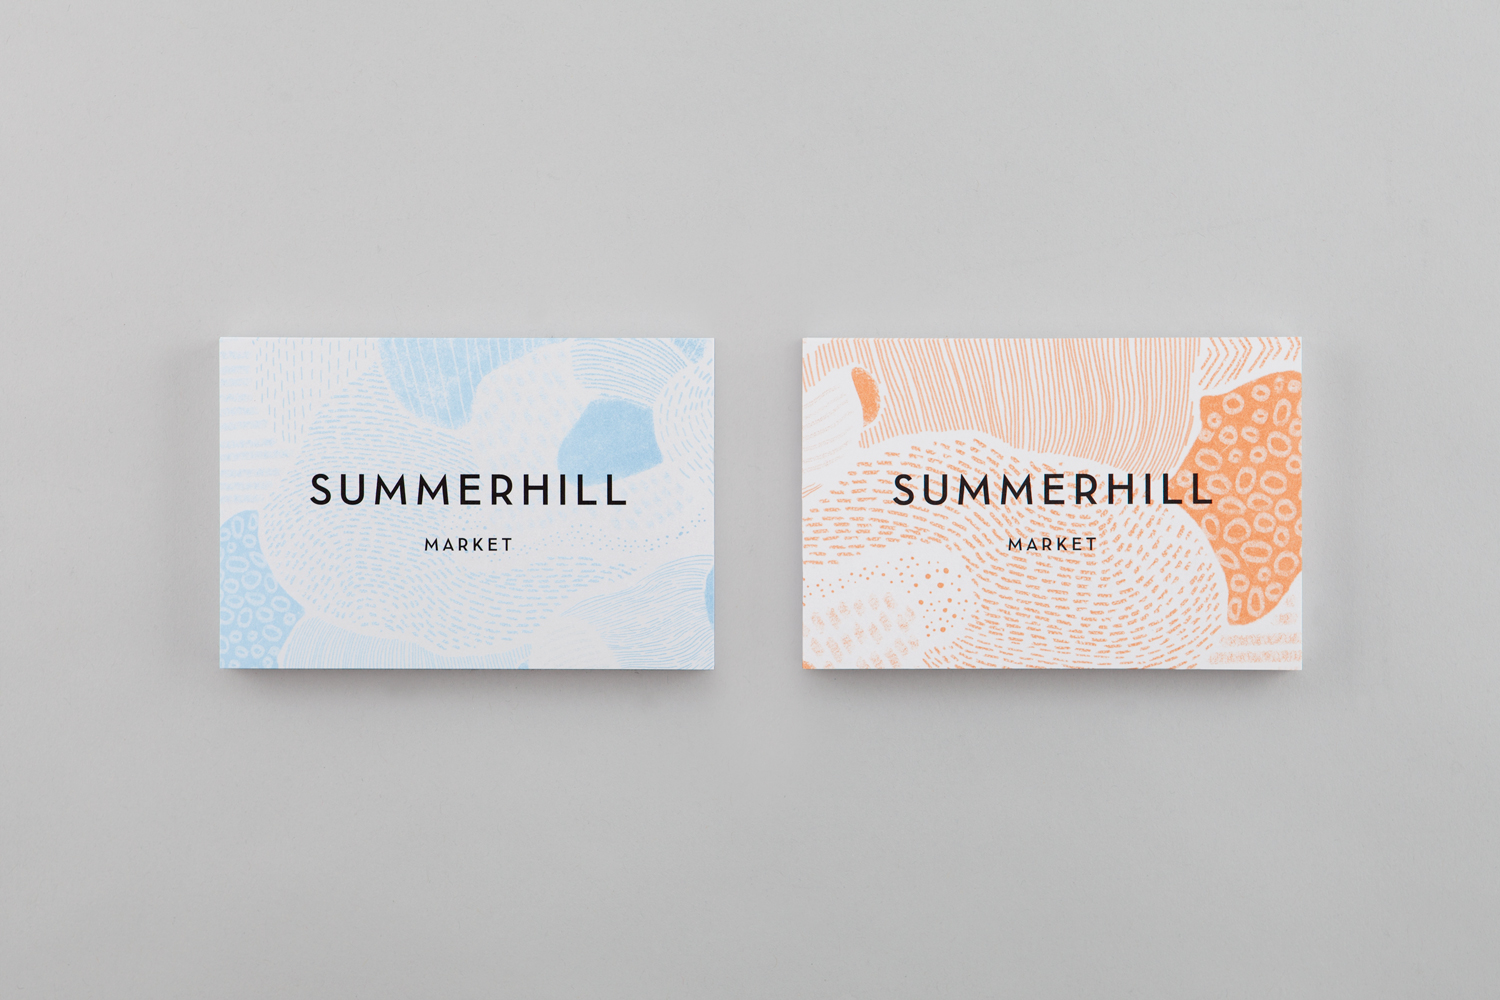 Logotype, illustration and notecards designed by Canadian studio Blok for Toronto based boutique grocery store Summerhill Market